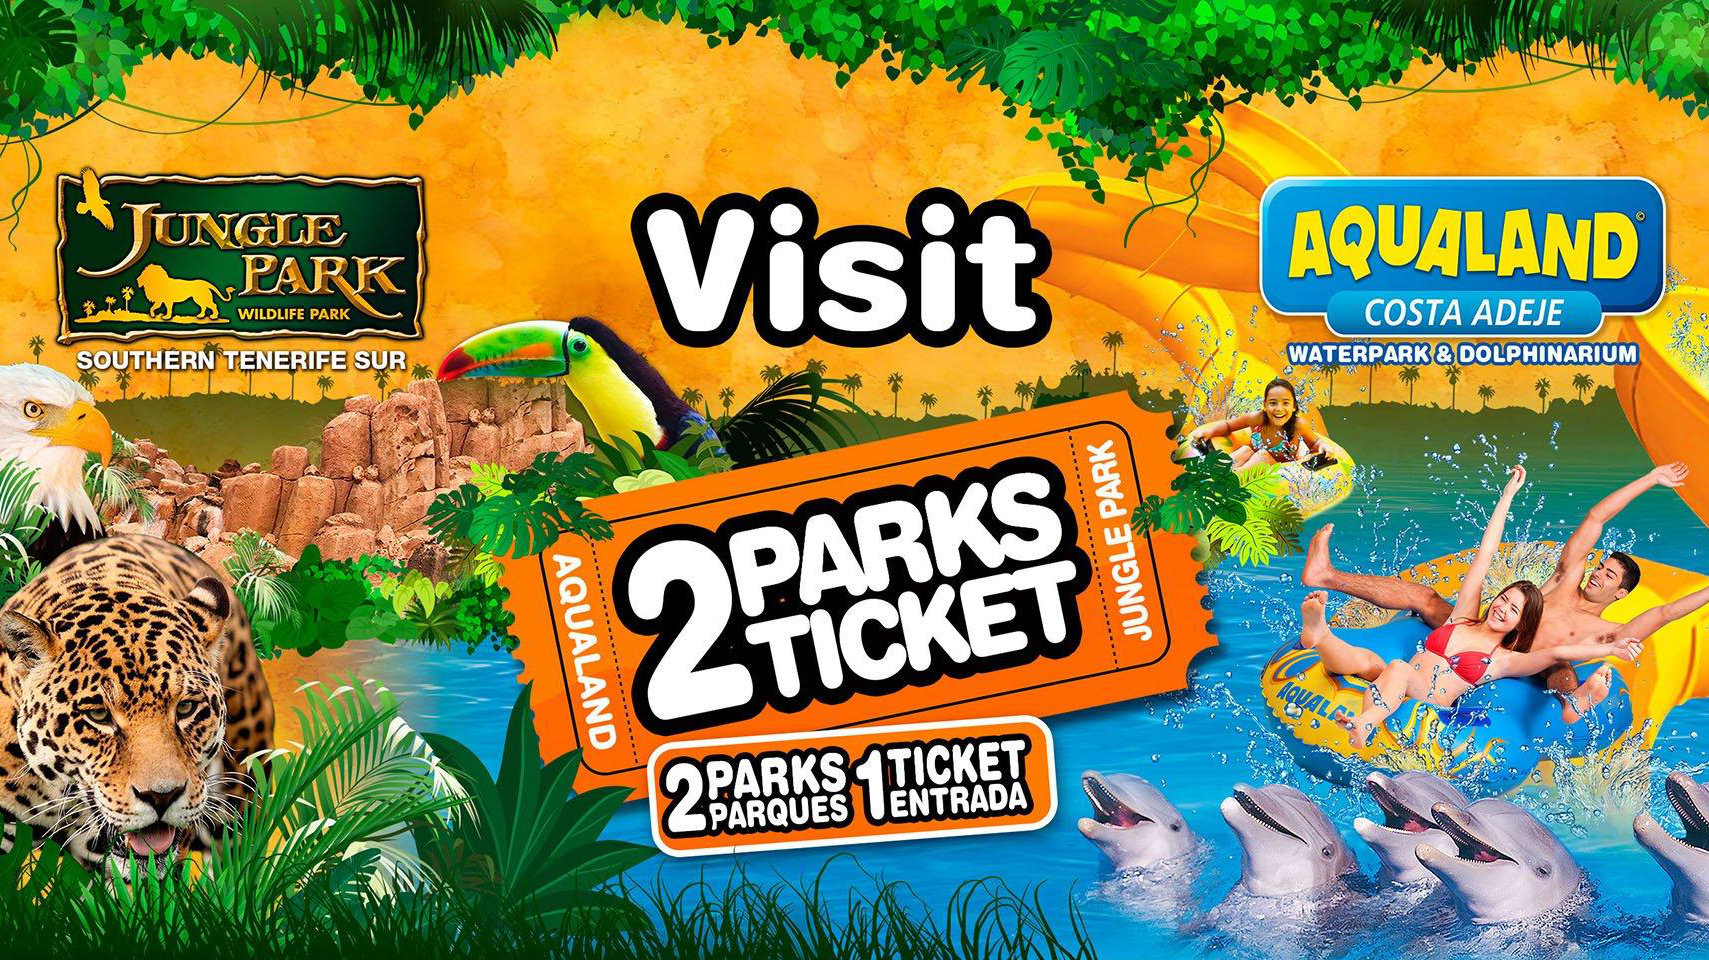 Loro Parque, online booking. Get your tickets for the best zoo in the world.